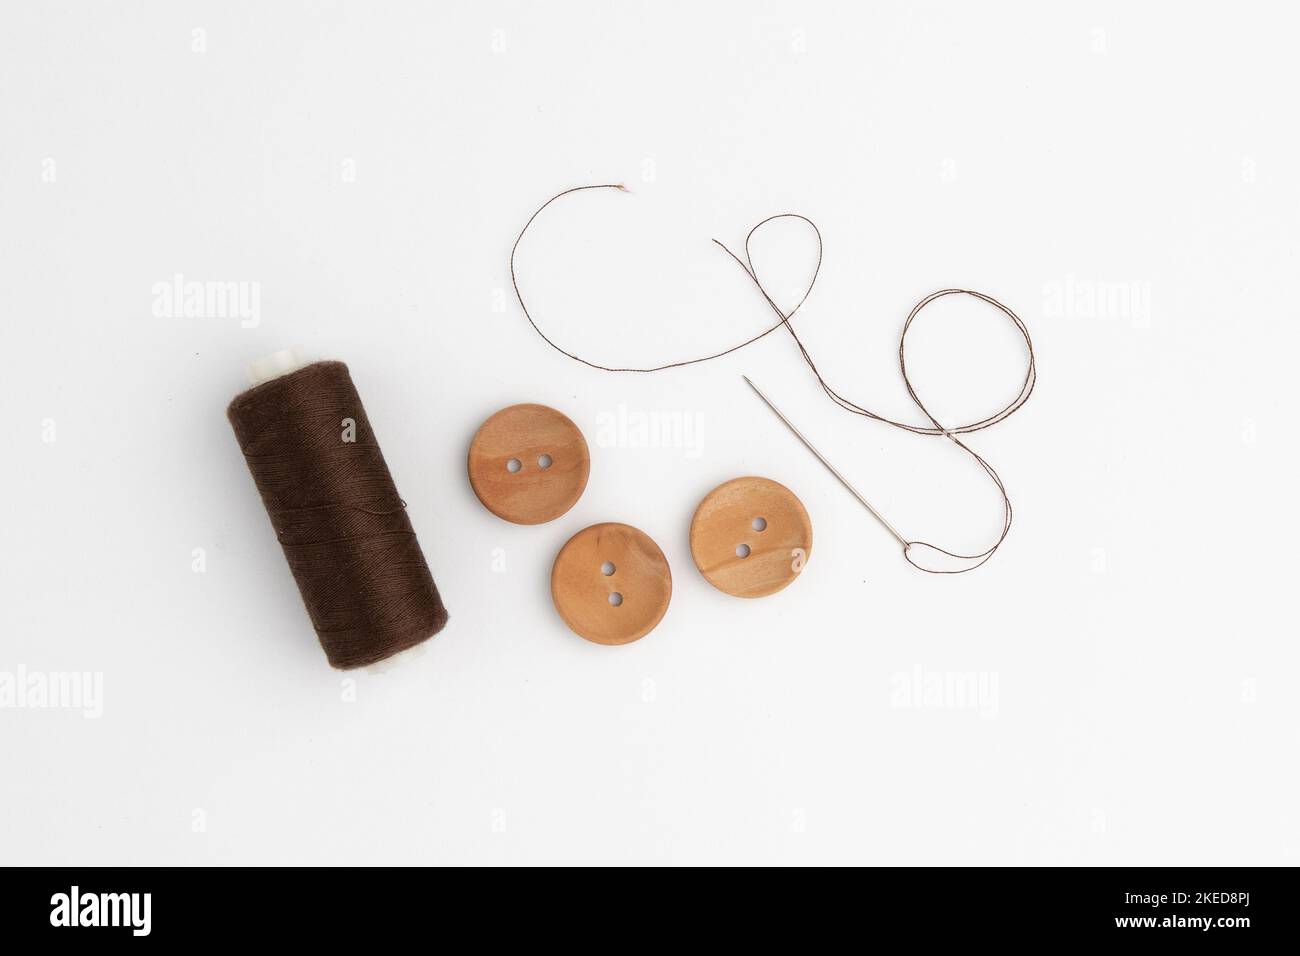 needle with thread and wooden buttons isolated on white background, concept of sewing and repairing clothes Stock Photo